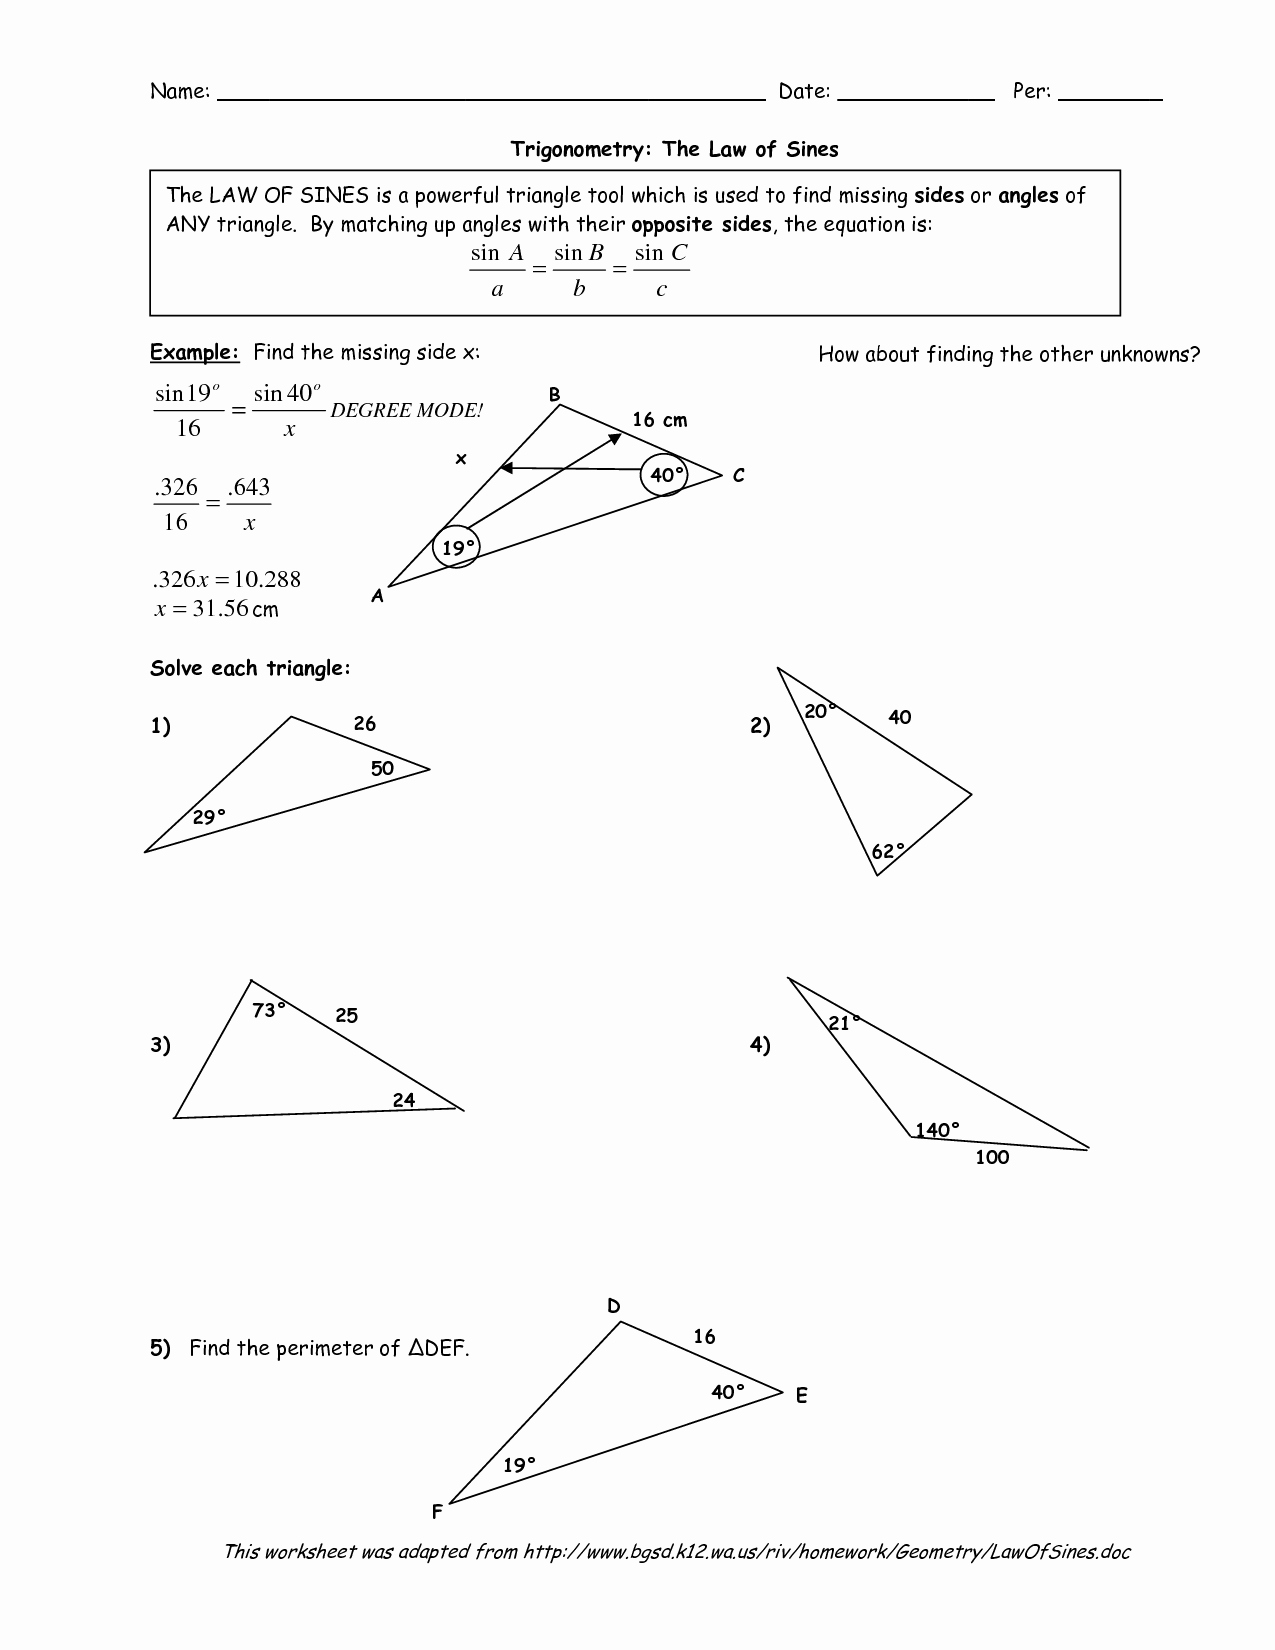 Law Of Sines Worksheet Answers Awesome 8 Best Of Law Sines Worksheet Answers Law Of